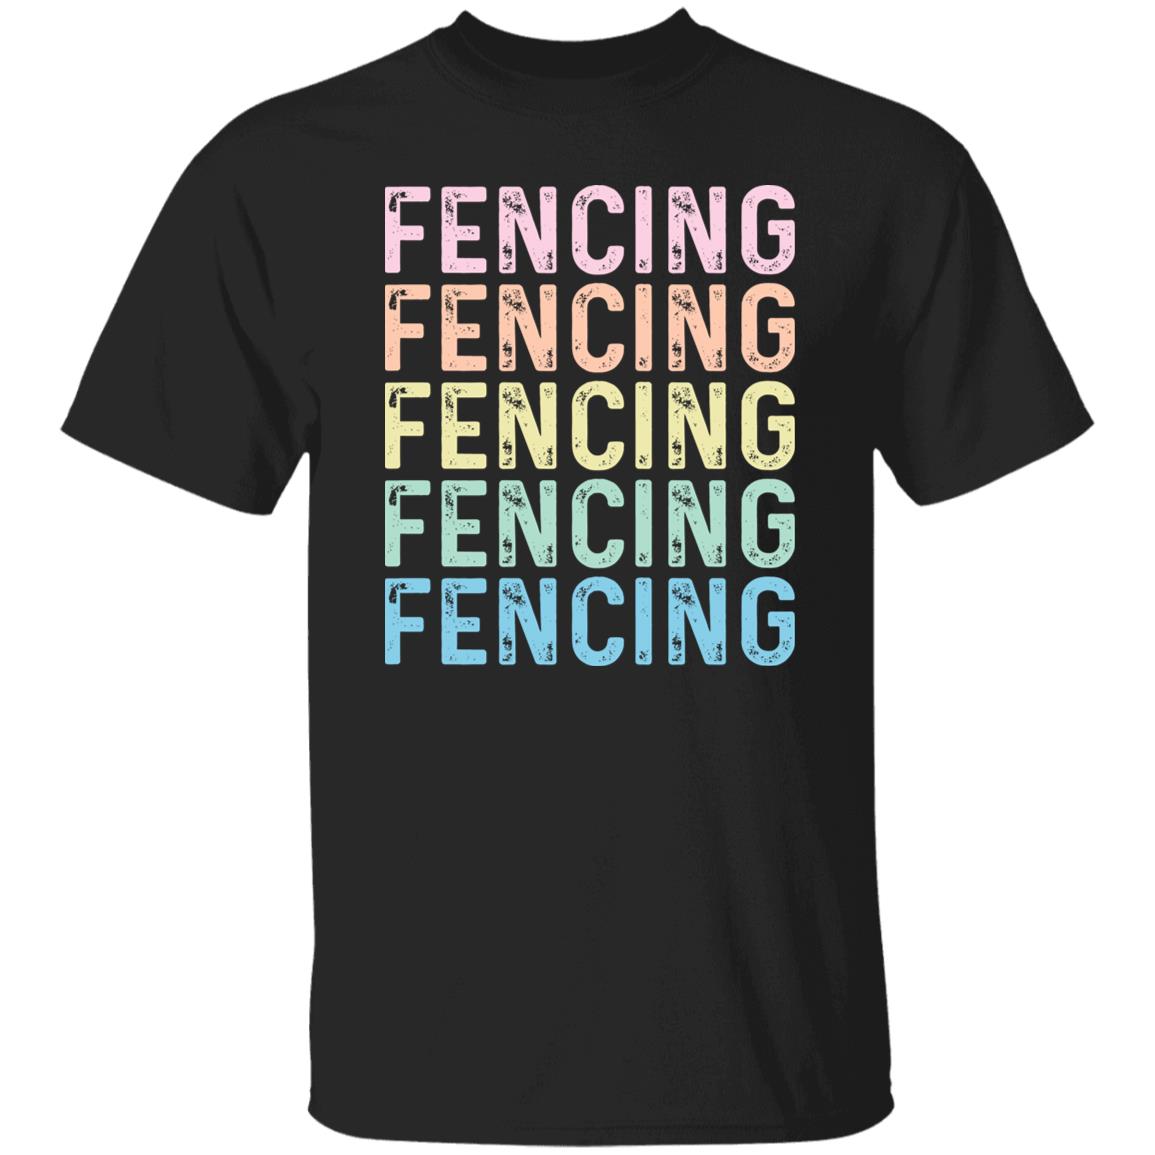 Fencing Unisex Shirt, Fencer tee Black S-2XL-Black-Family-Gift-Planet